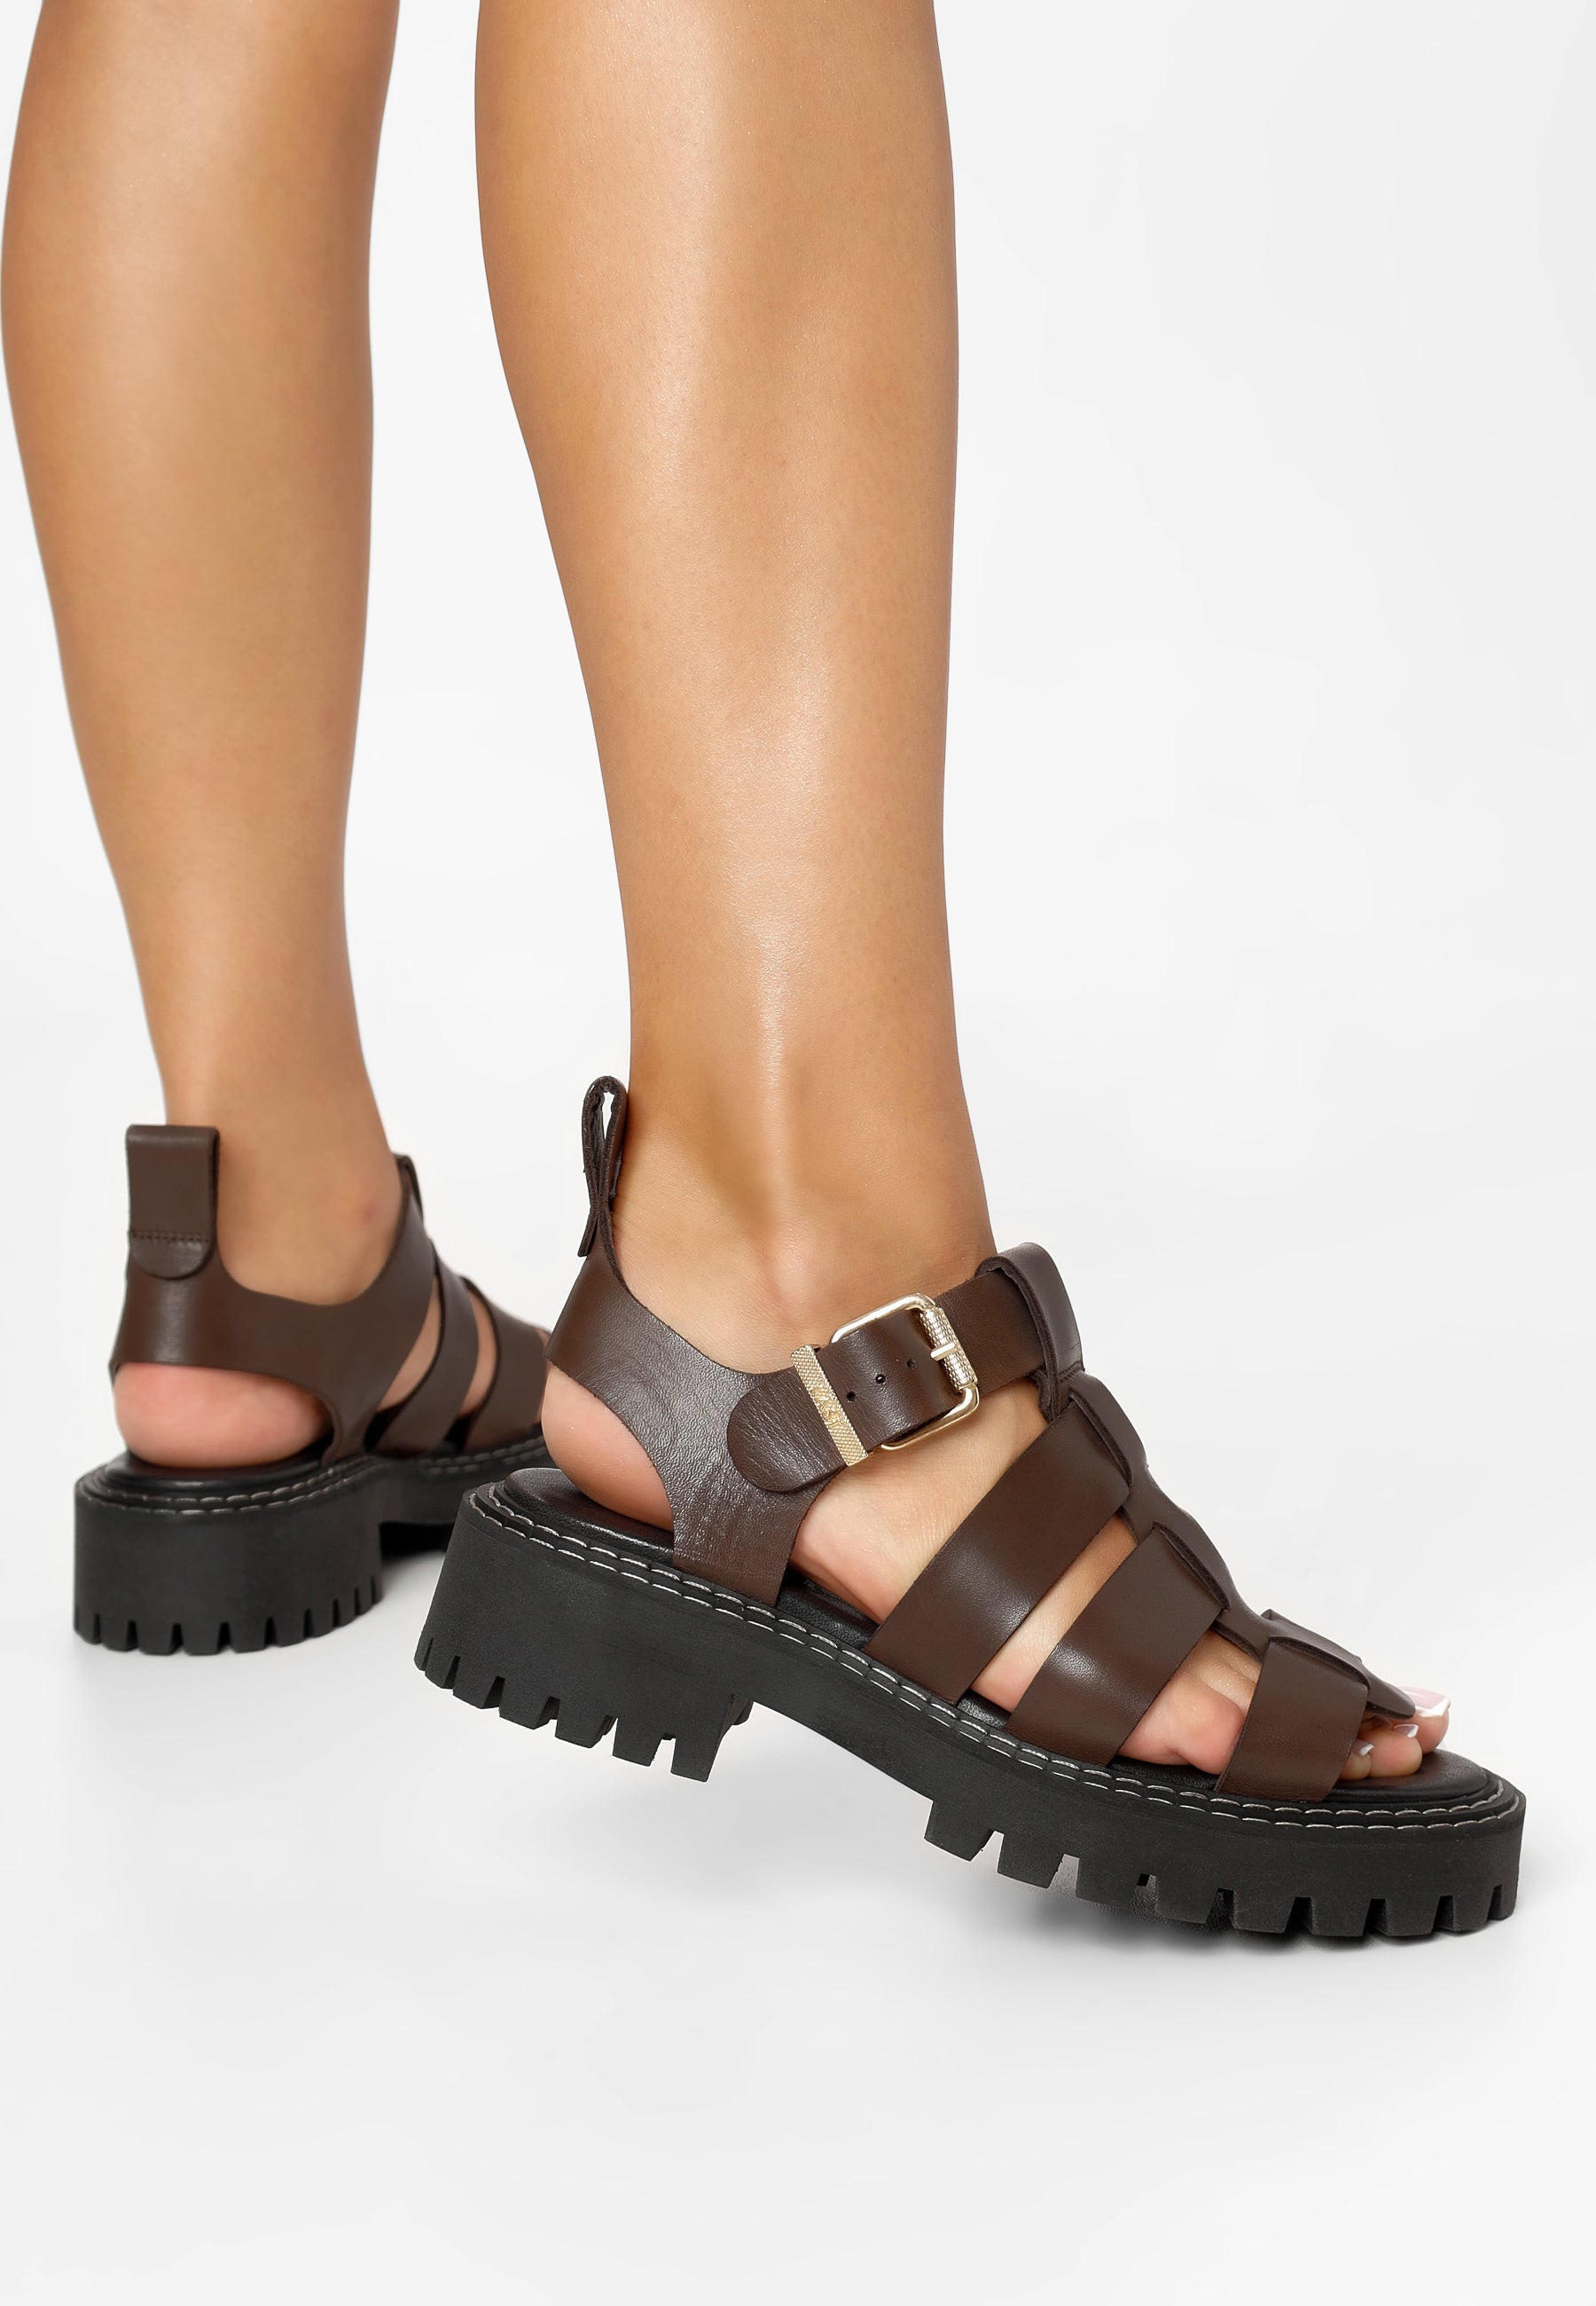 Daphny Brown Leather Chunky Sandals LAST1519 - 7